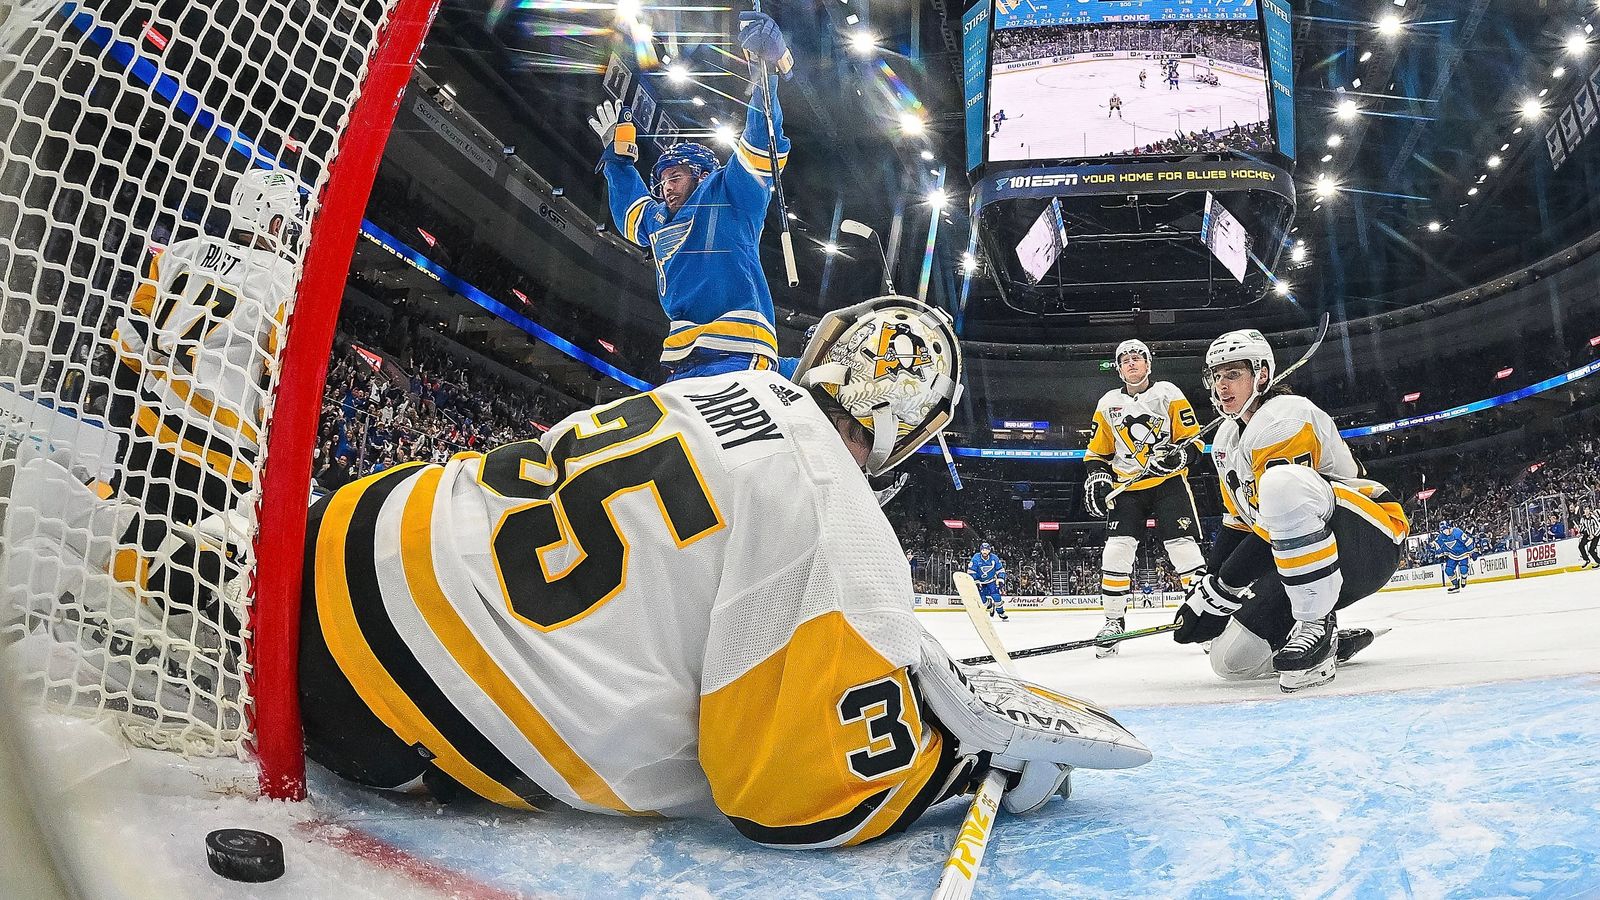 Saad scores twice as Blues beat Penguins 4-2, National Sports